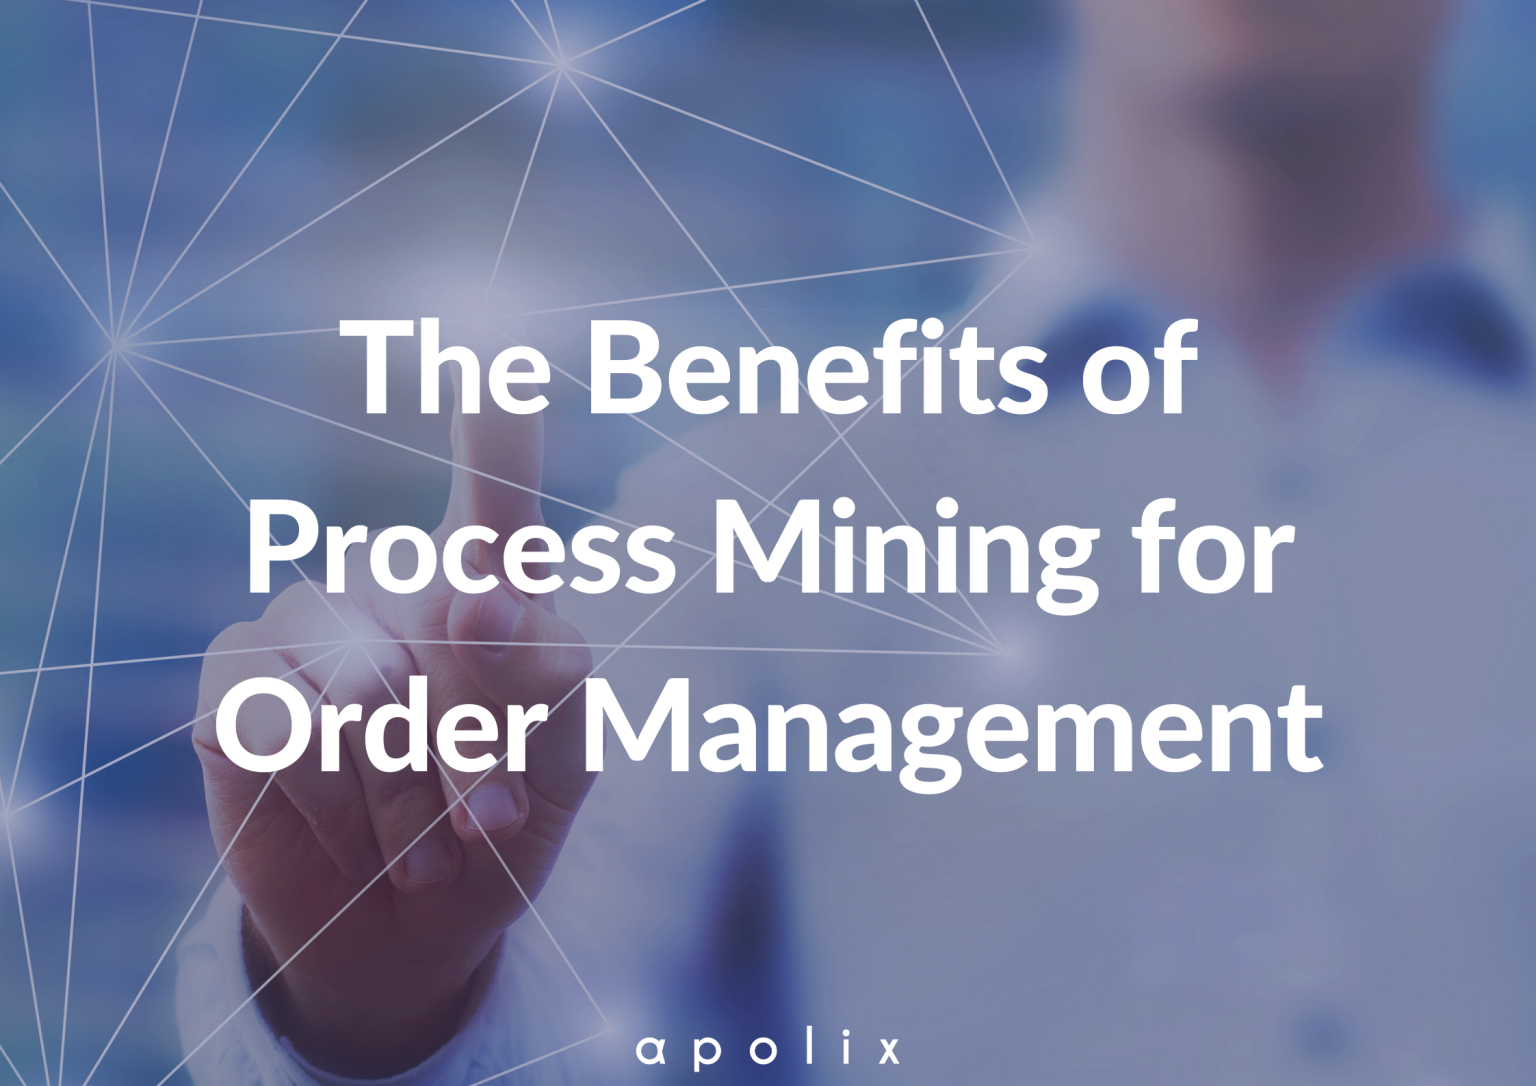 The Benefits of Process Mining for order management